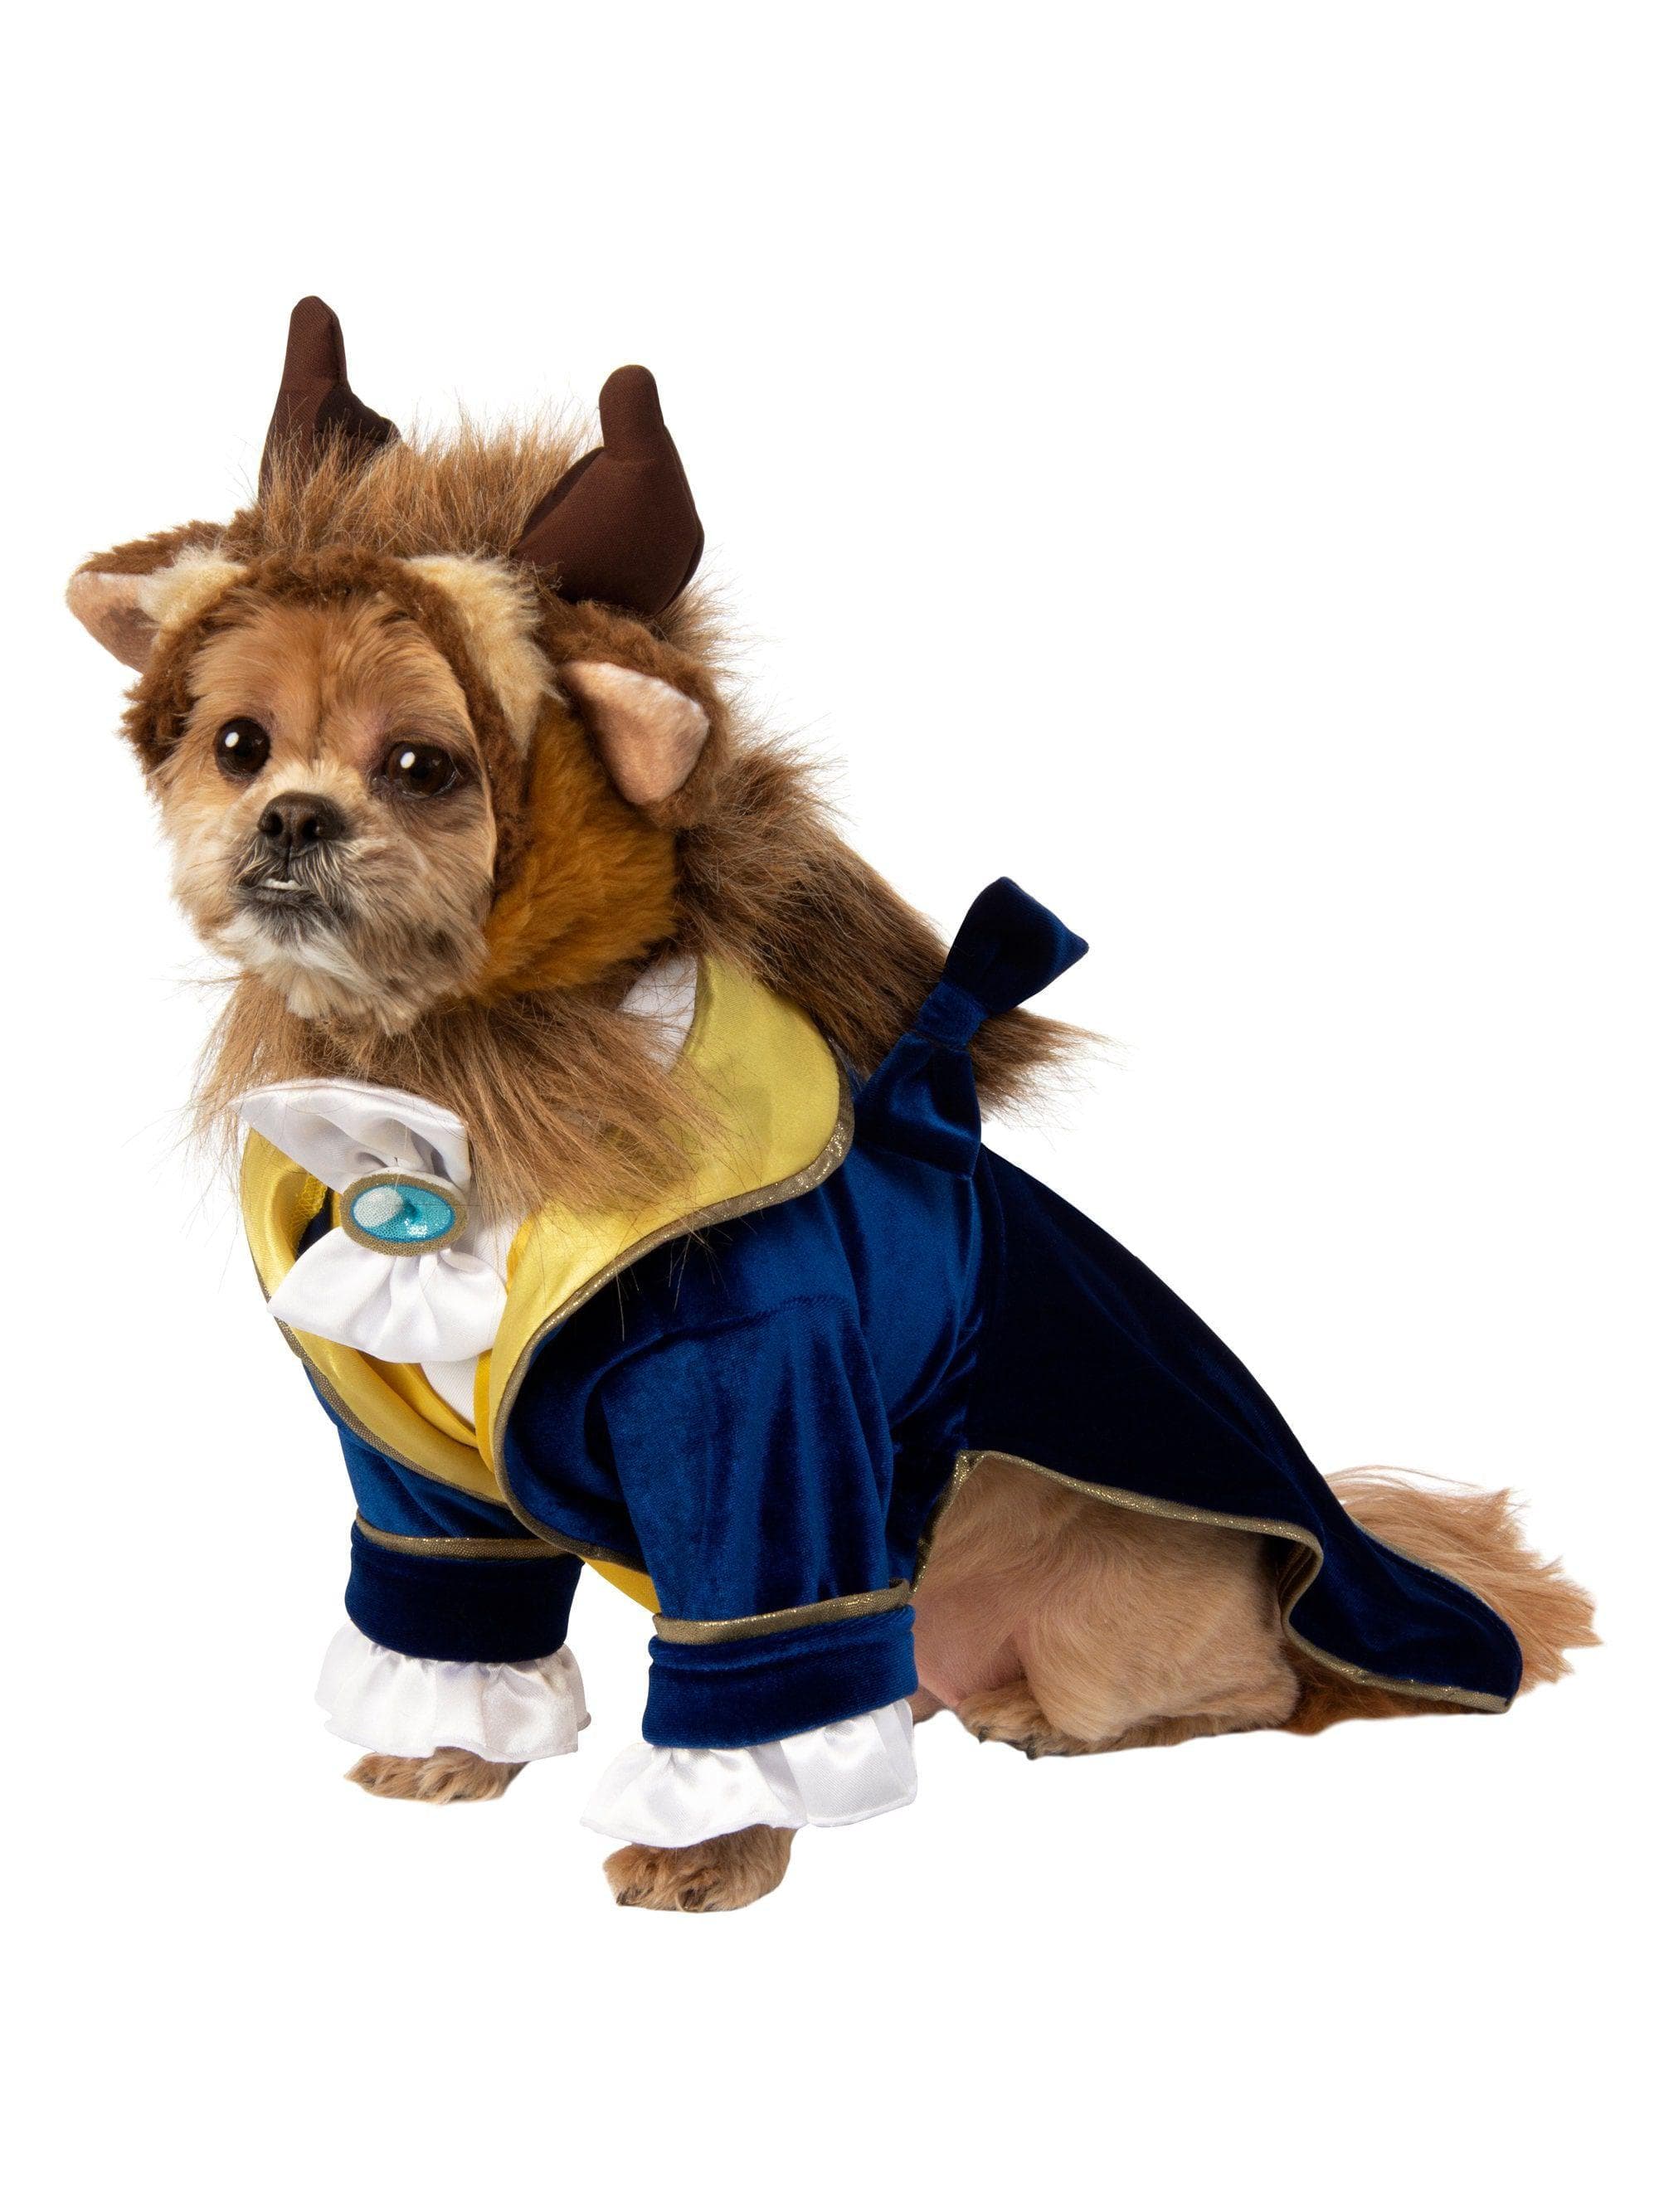 Beauty and the Beast Pet Costume - costumes.com